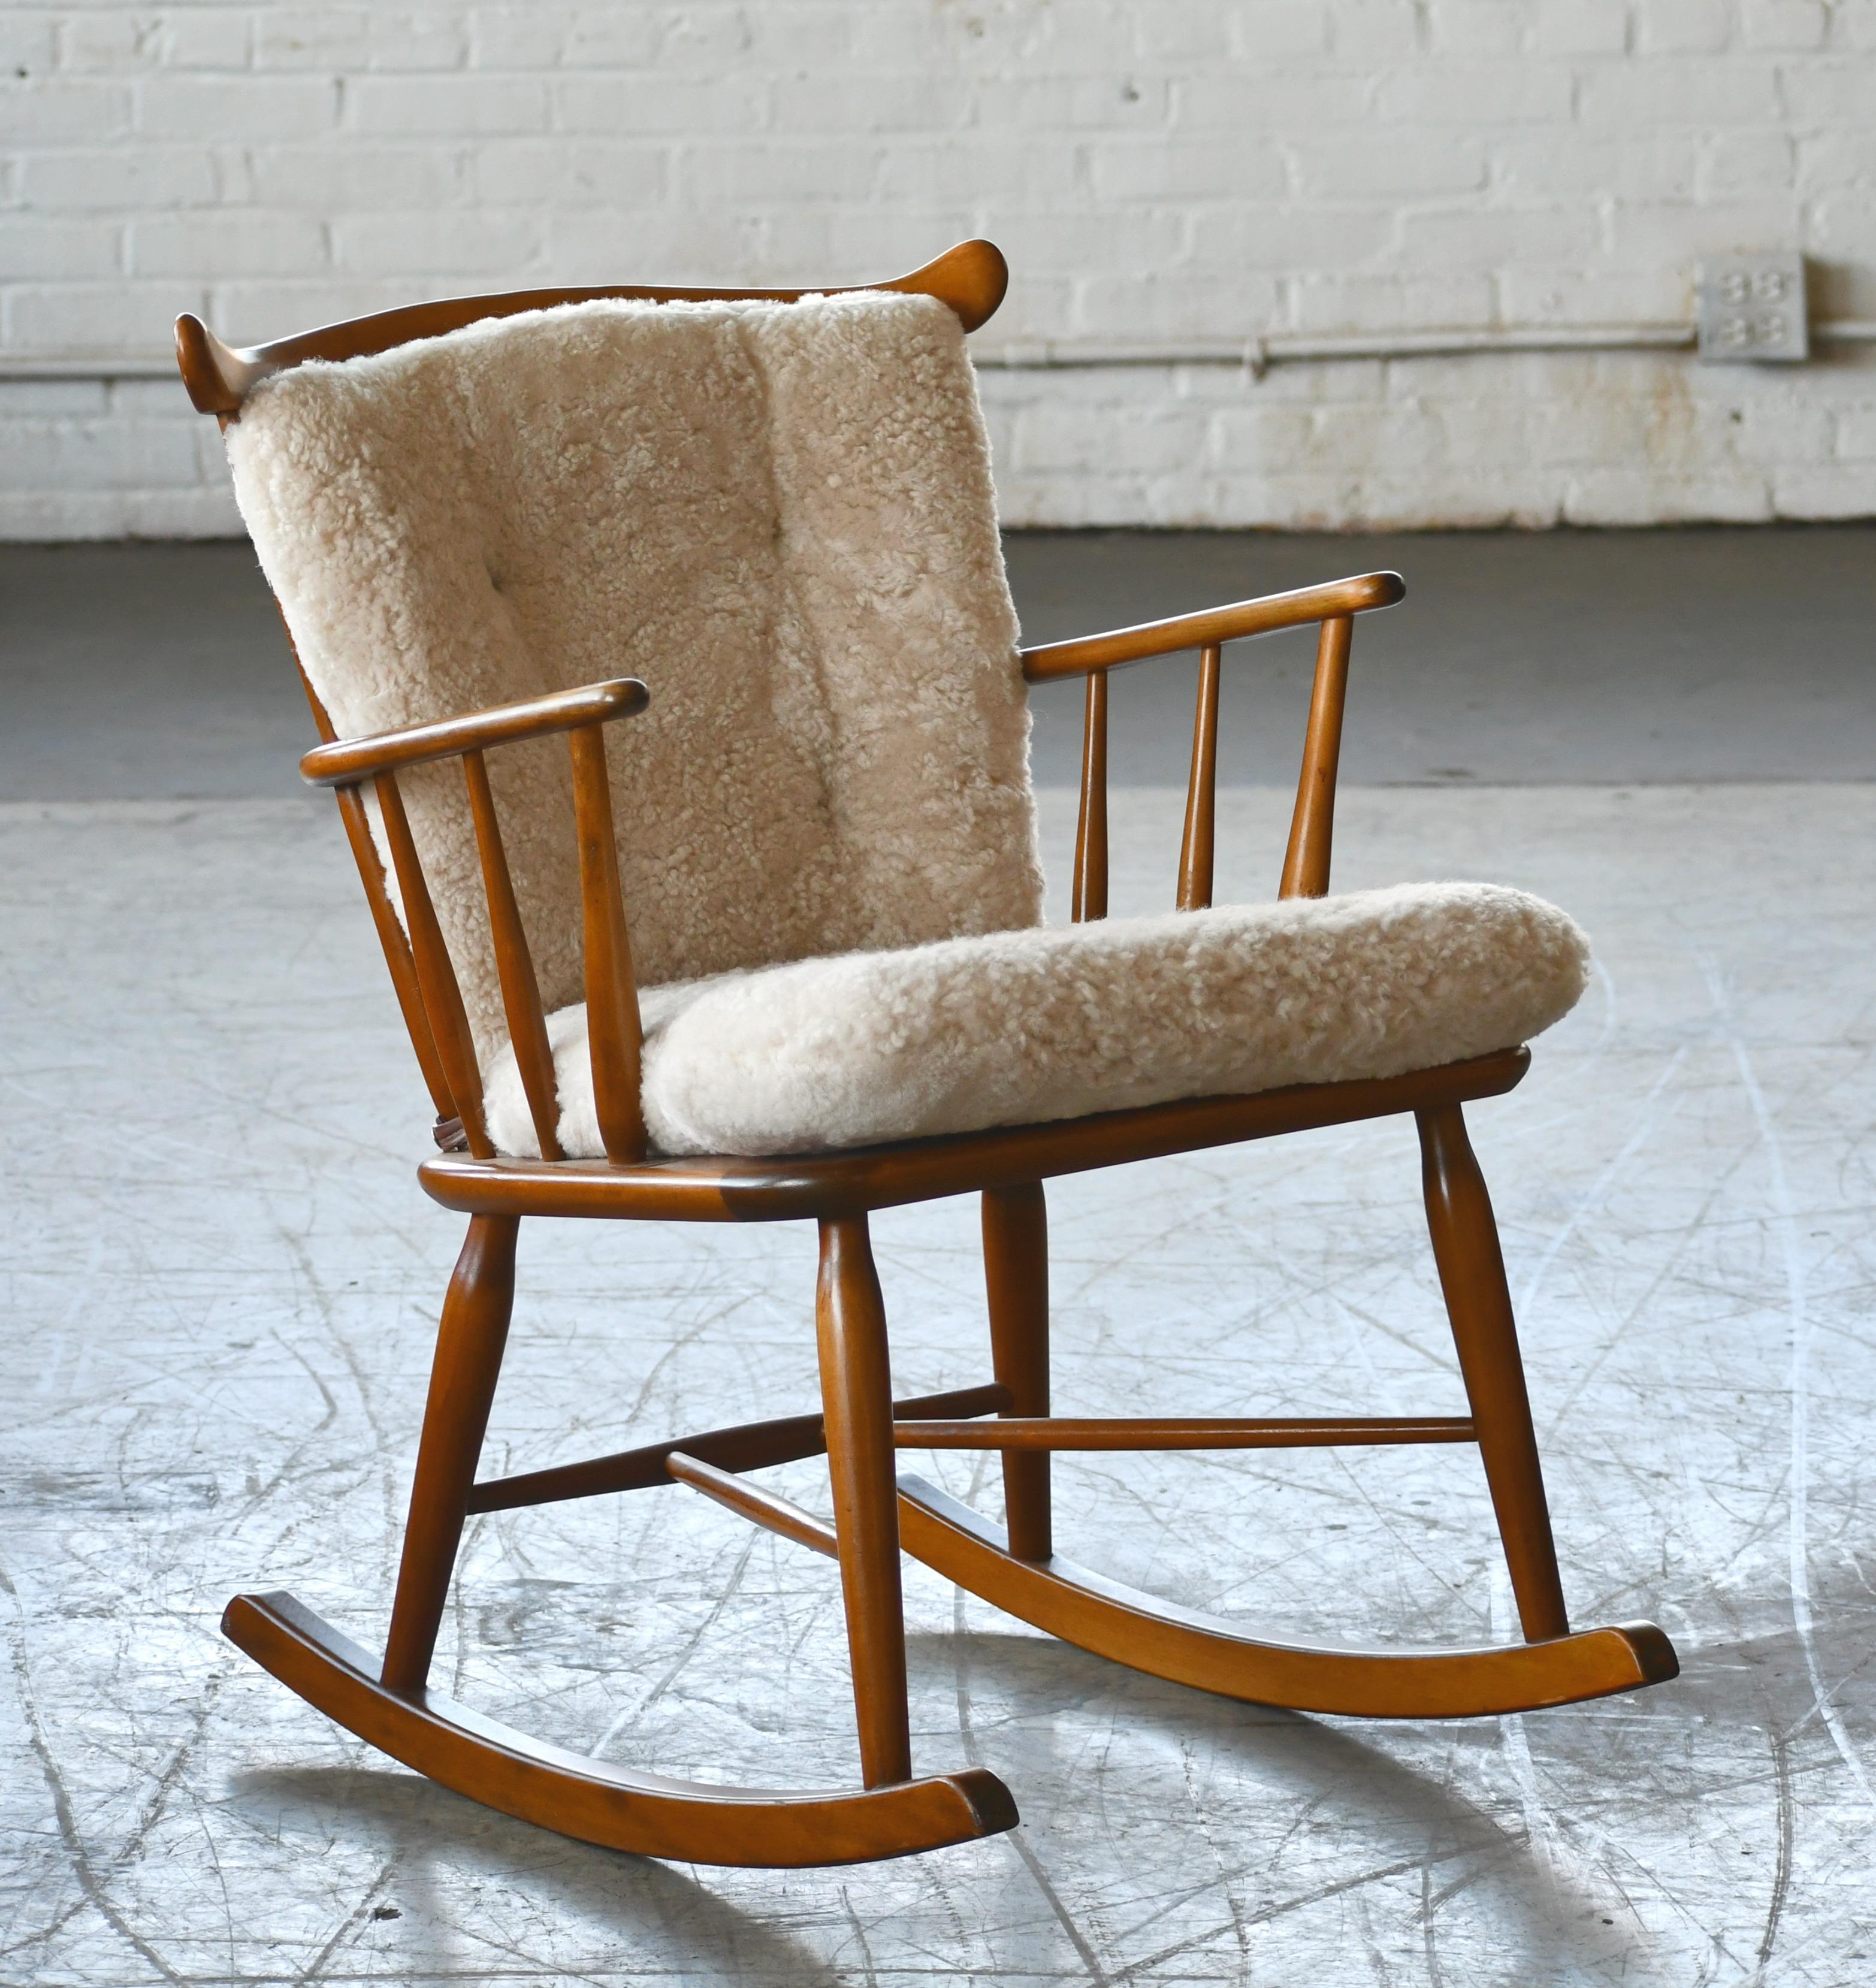 Great little low back spindle back rocking chair from Farstrup Møbler, Denmark made circa 1950. We re-upholstered the chair with new cushions in an exuberant curly sheepskin in a putty color and cognac colored leather buttons that just sucks you in.